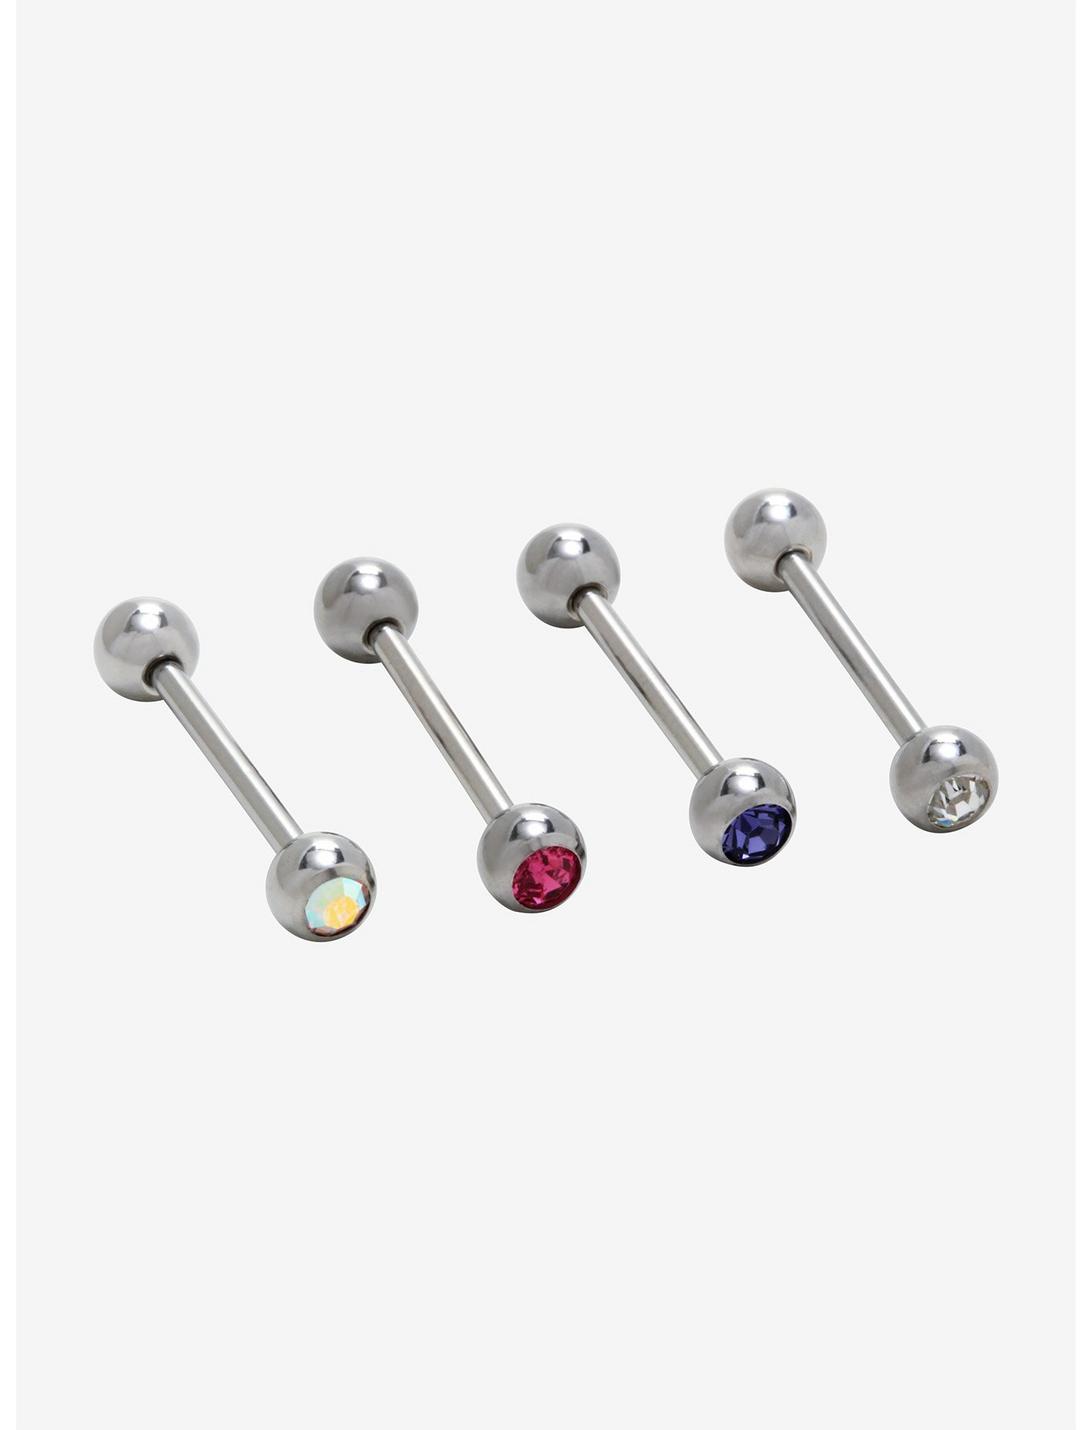 14G Steel Purple Pink & Clear CZ Barbell 4 Pack, , hi-res